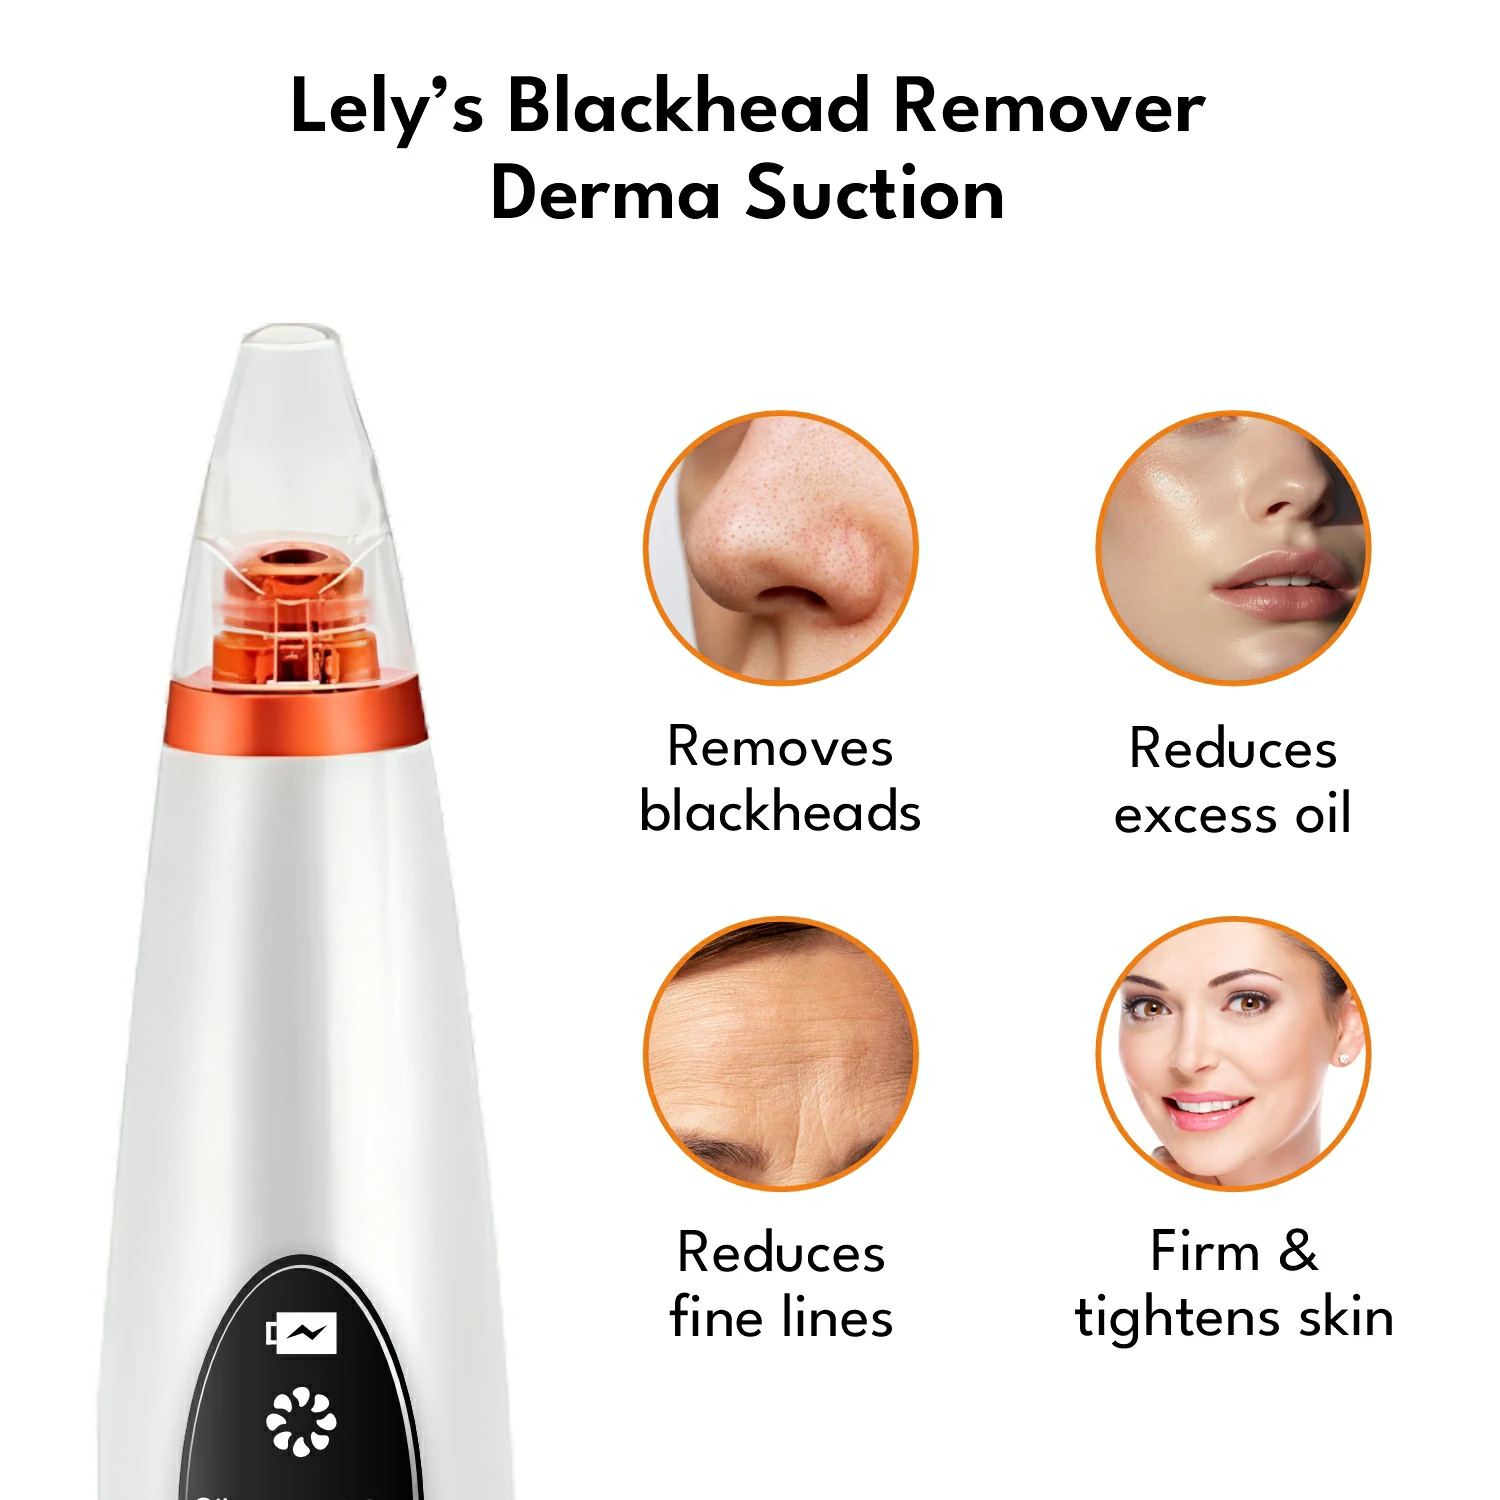 How to Use Derma Suction